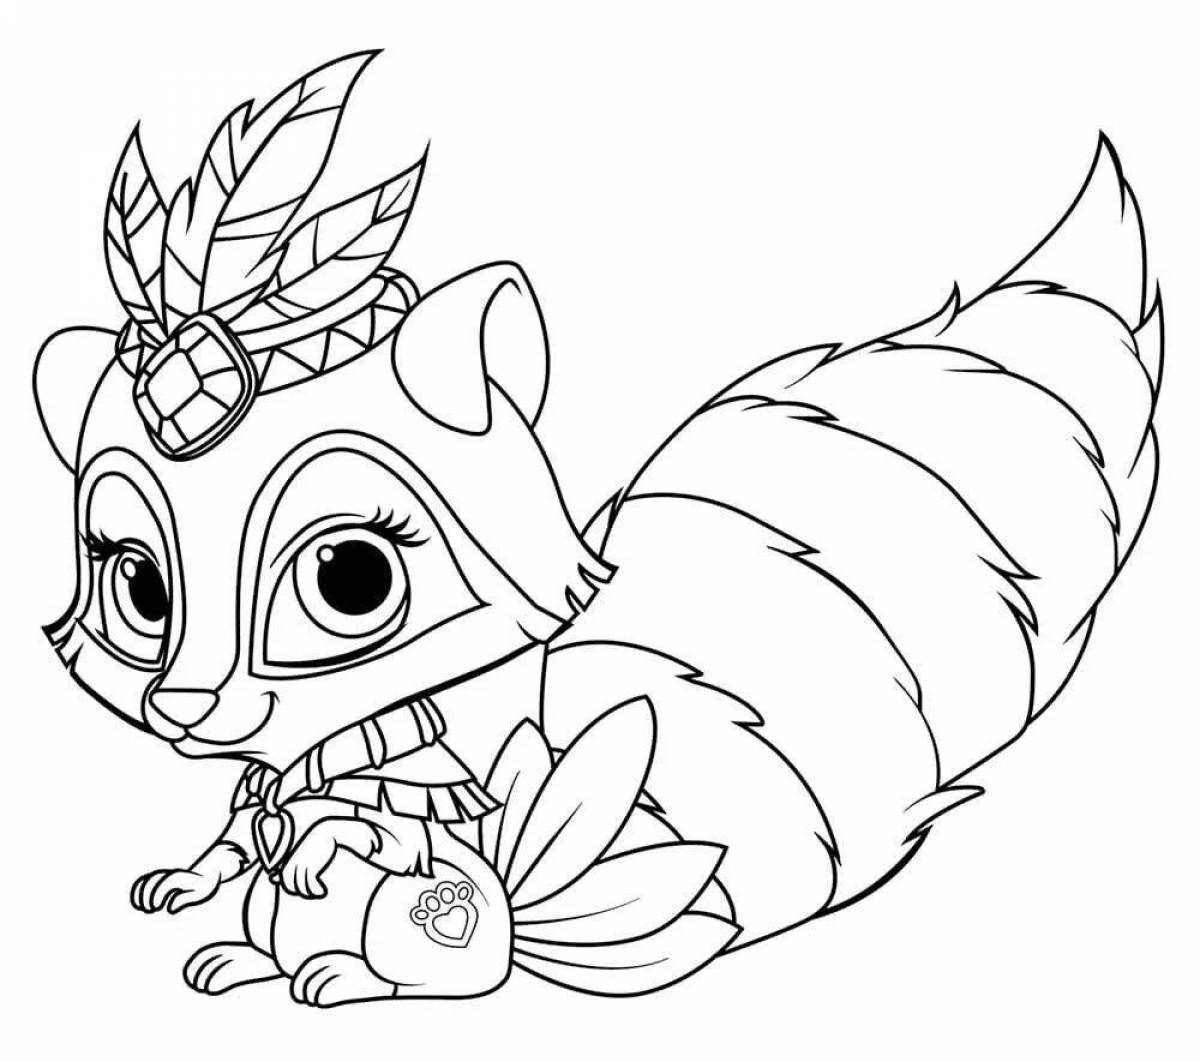 Amazing chachimol coloring page